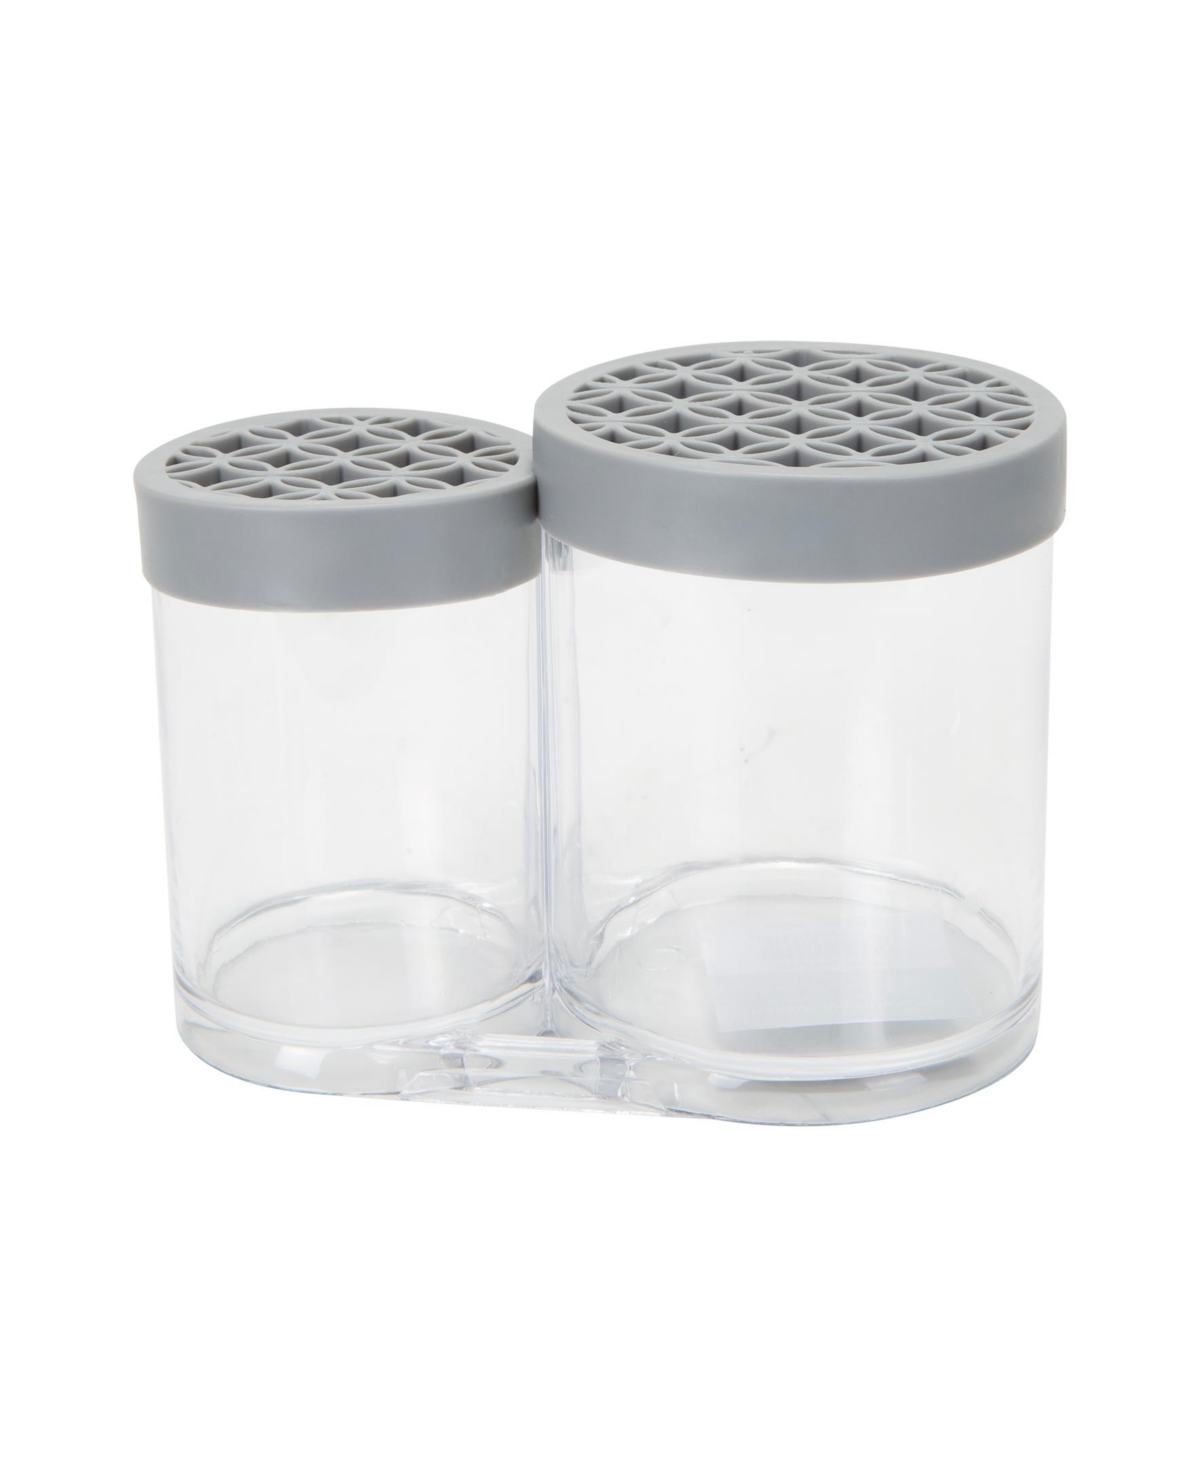 2 Compartment Cosmetic Brush Holder - Gray